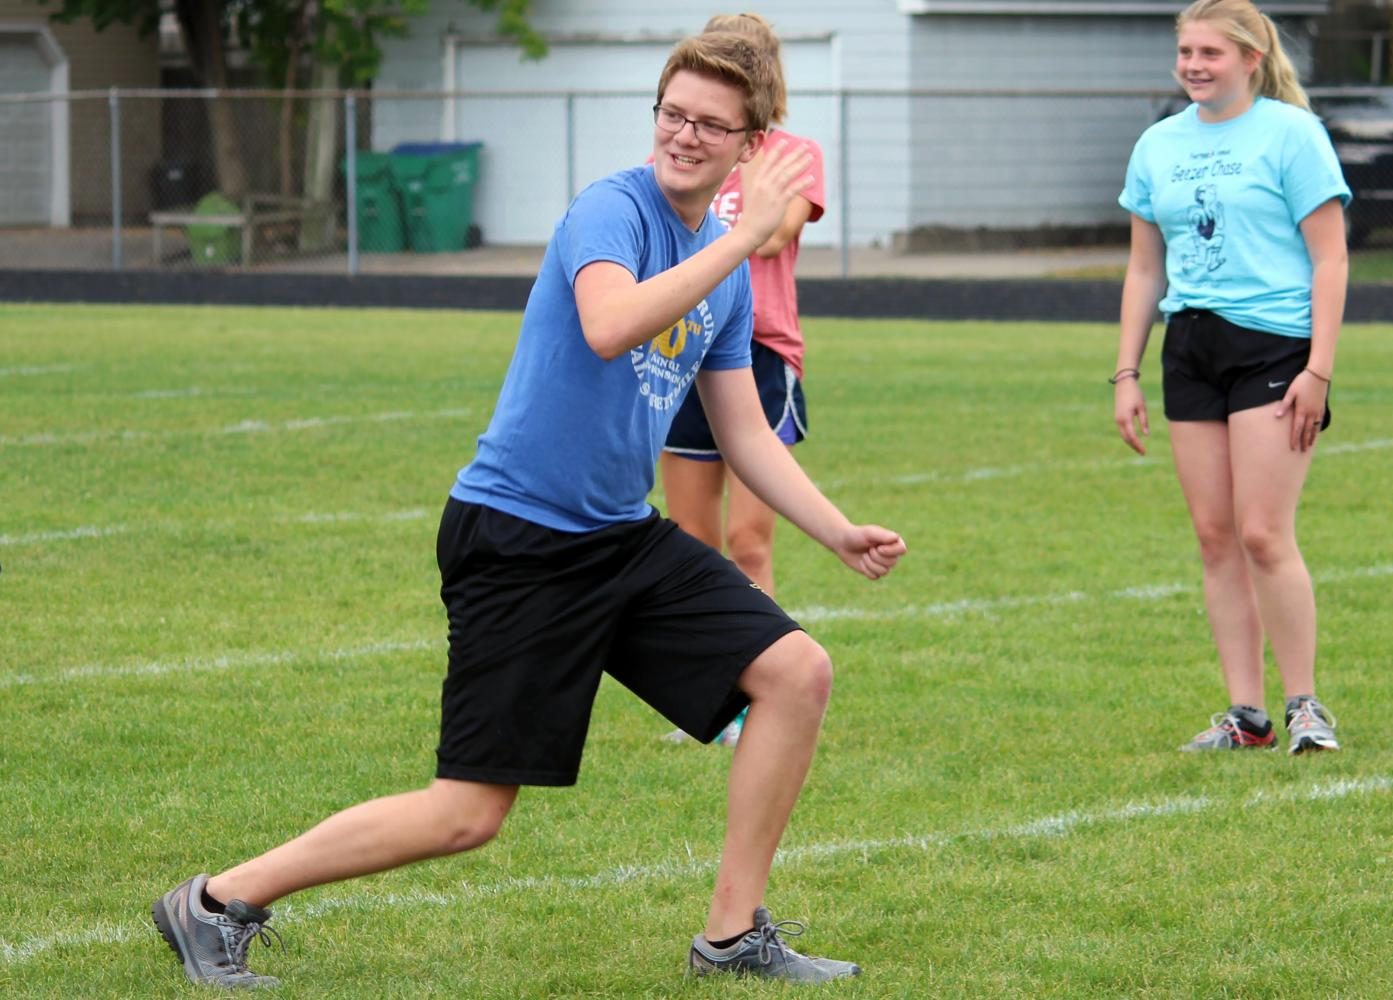 Senior Collin Perkins leads warm ups at the start of cross country practice Sept. 15.